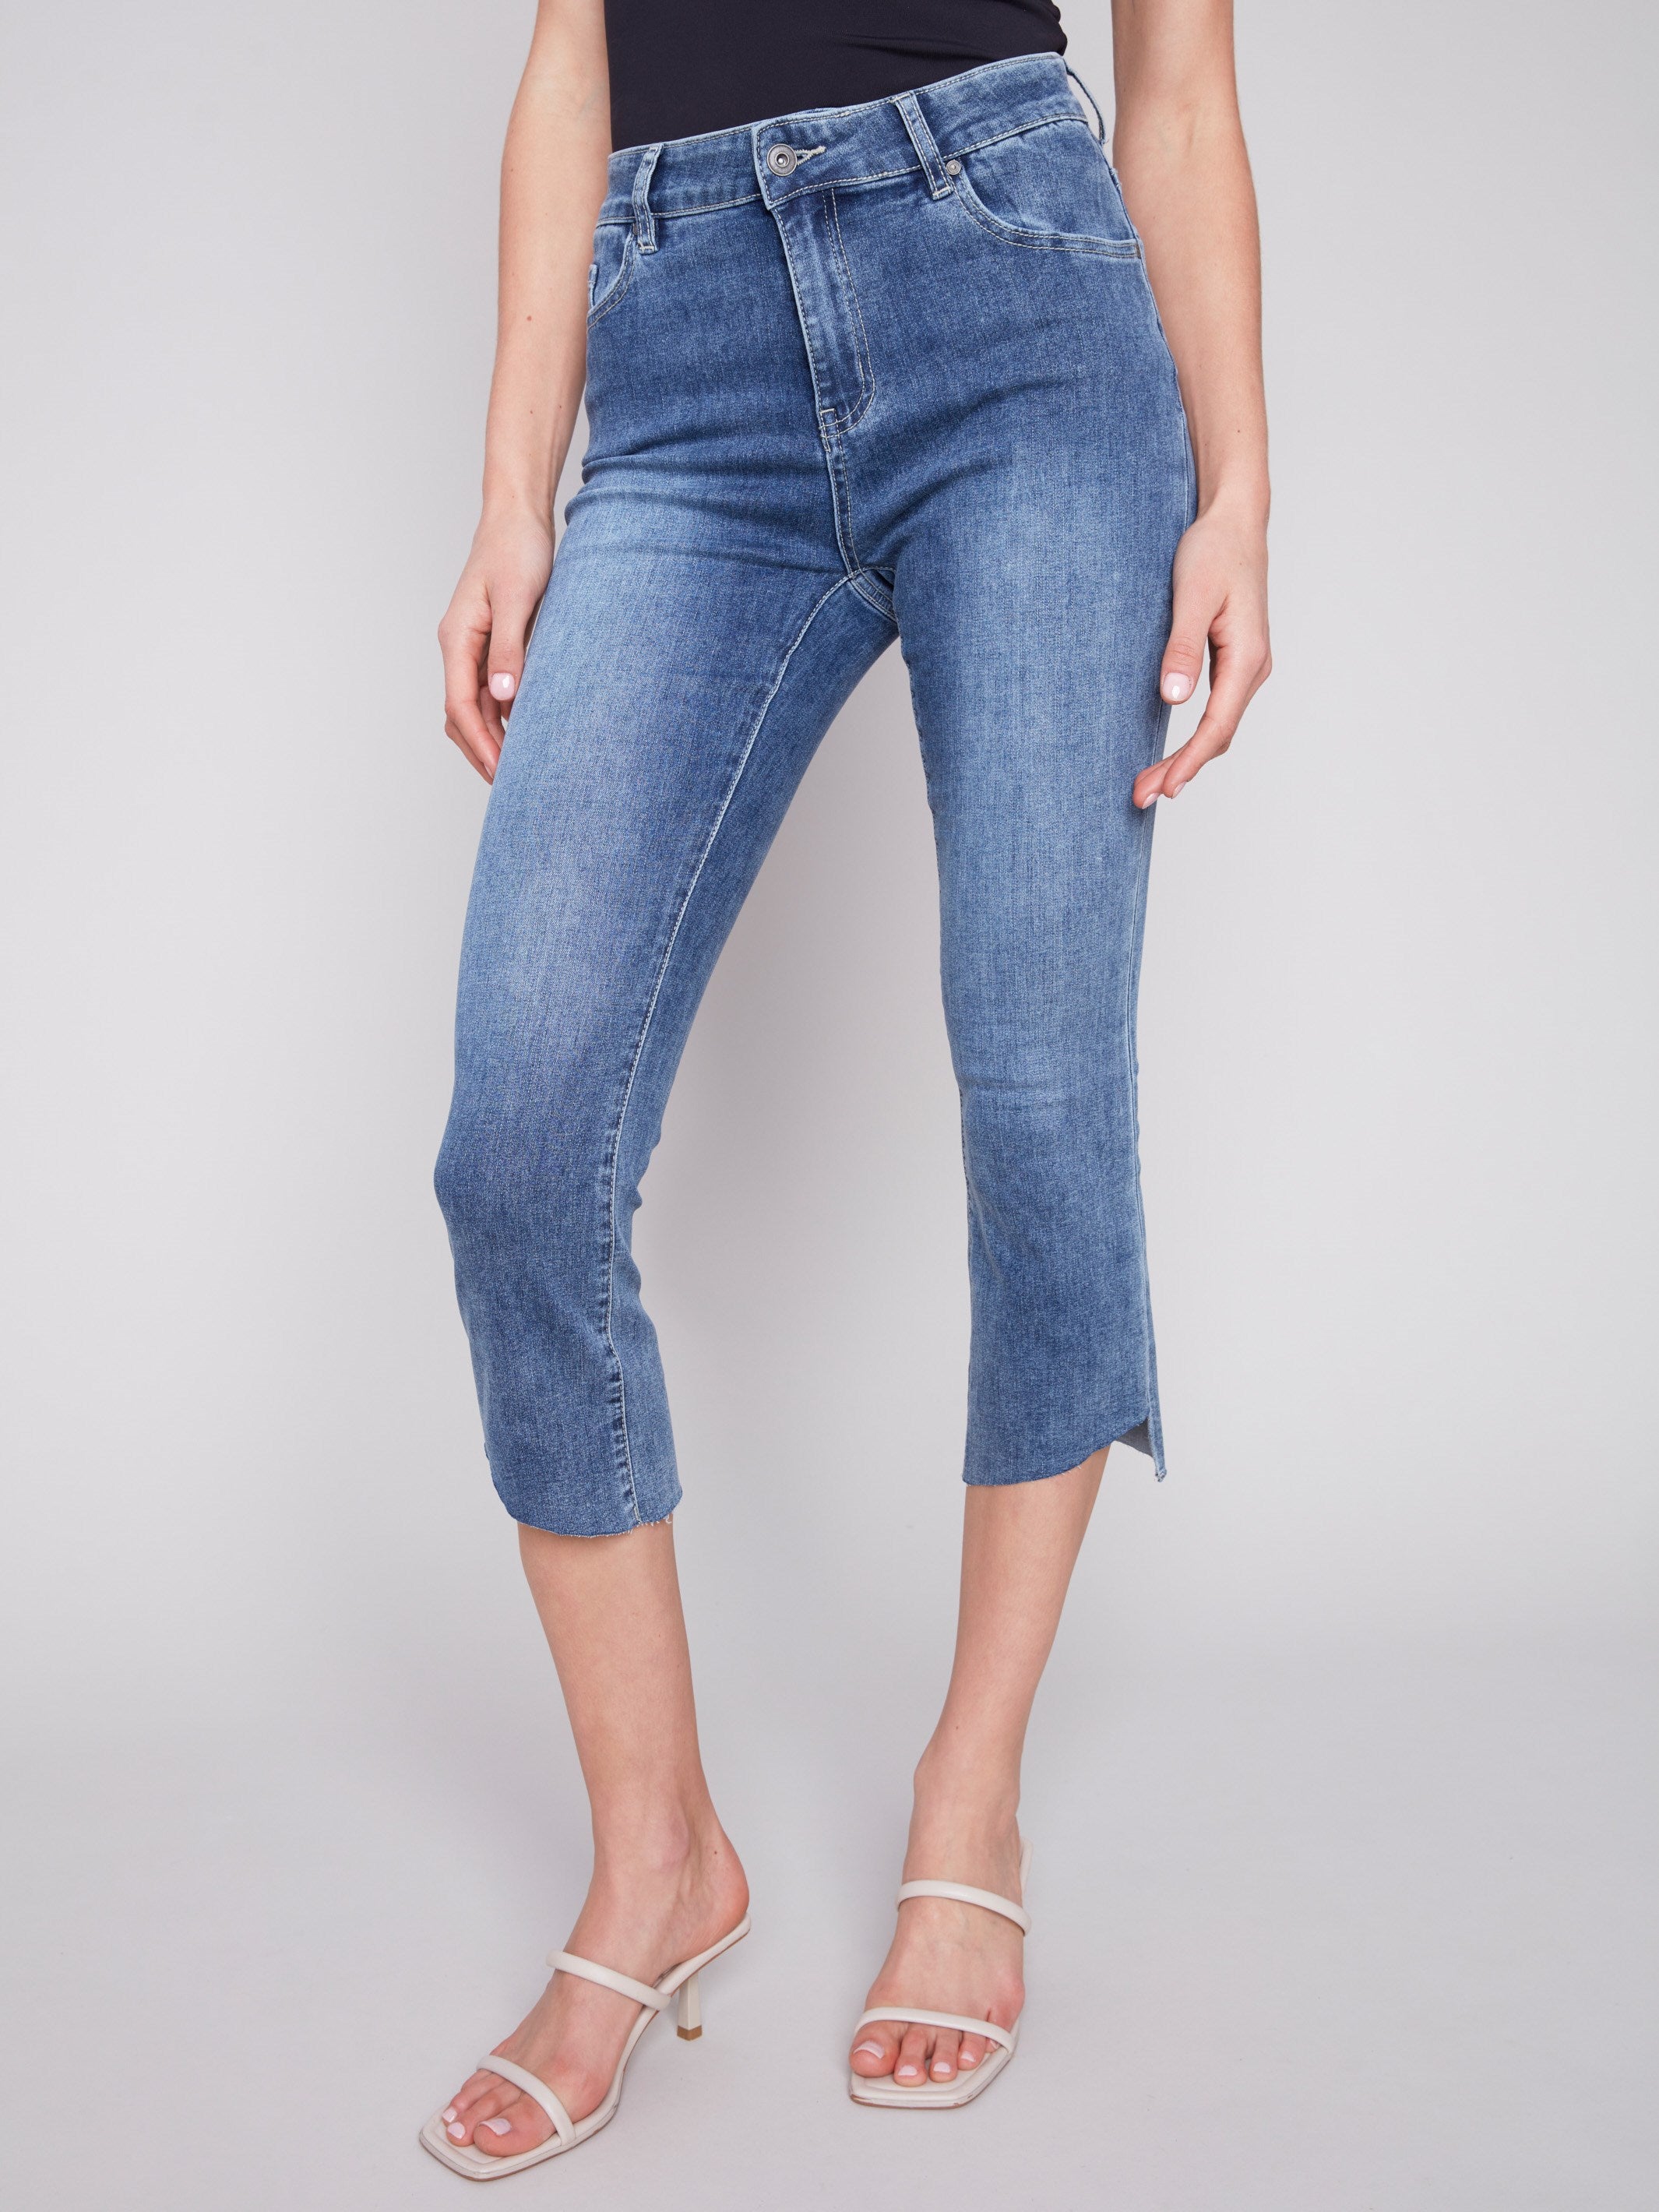 Cropped Bootcut Jeans with Asymmetrical Hem - Medium Blue - Charlie B Collection Canada - Image 2